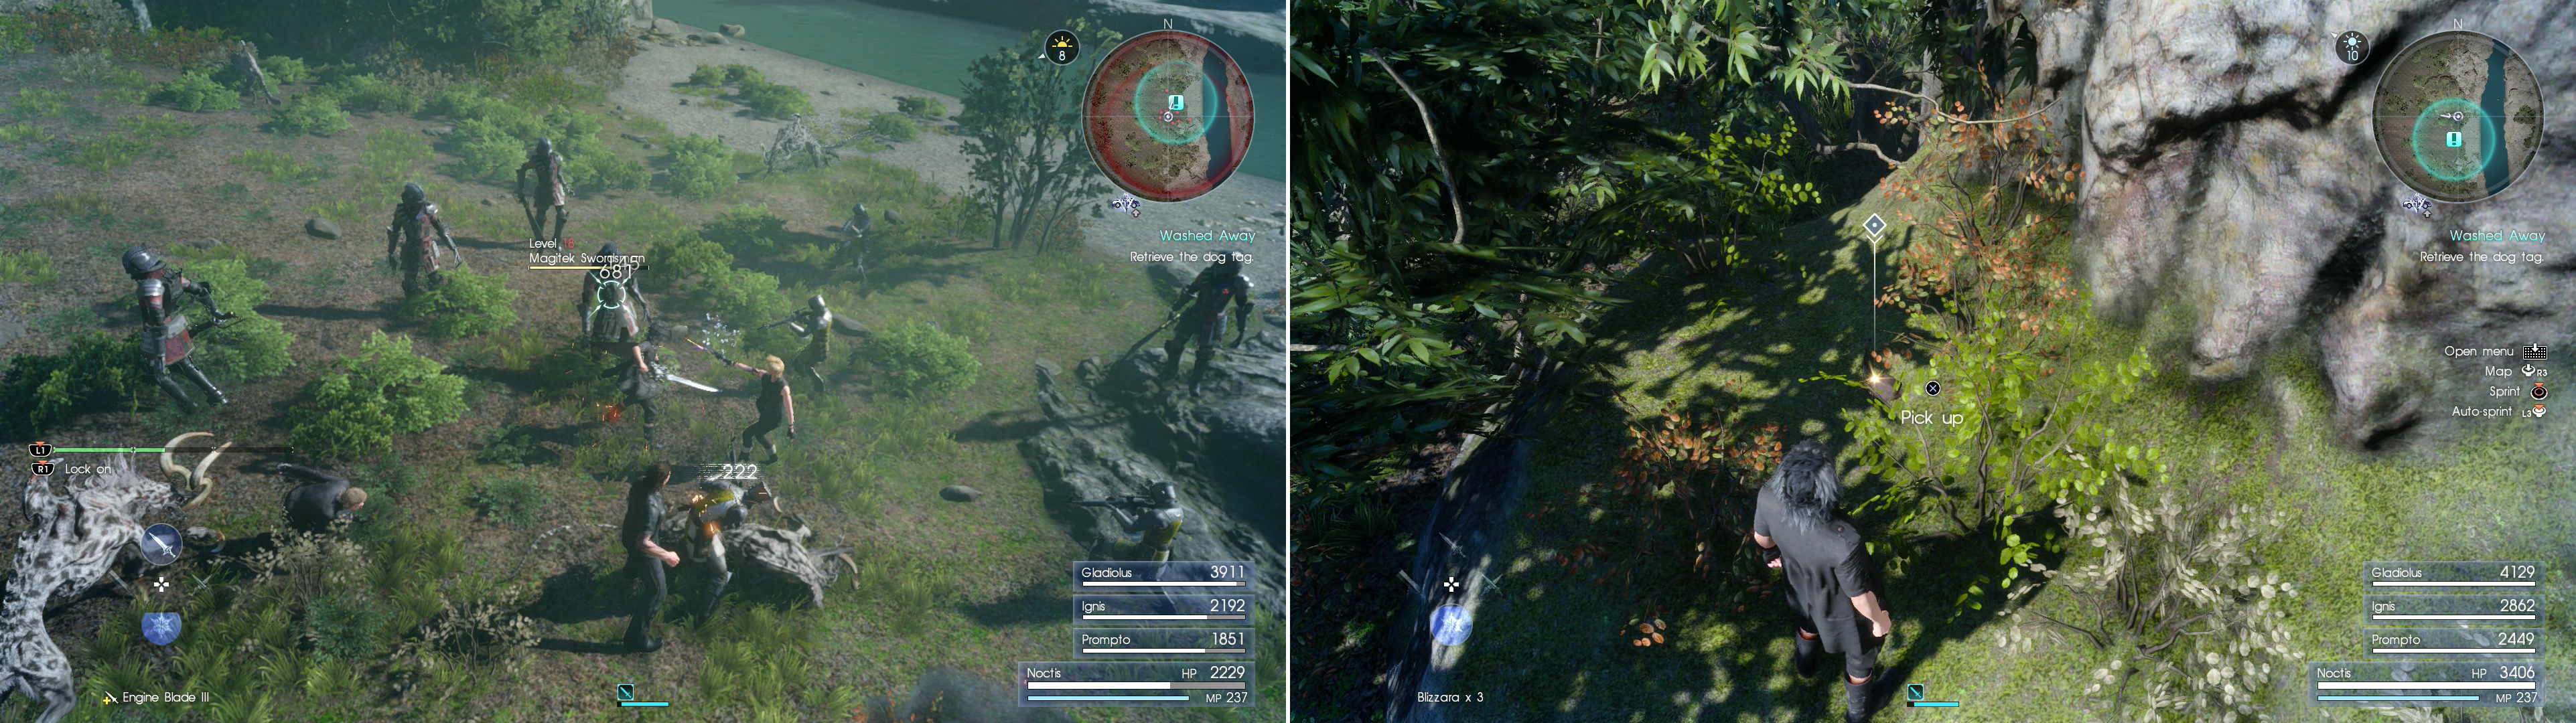 You’ll constantly be pestered by imperials and local fauna (left) as you search for the Crushed Dog Tag (right).